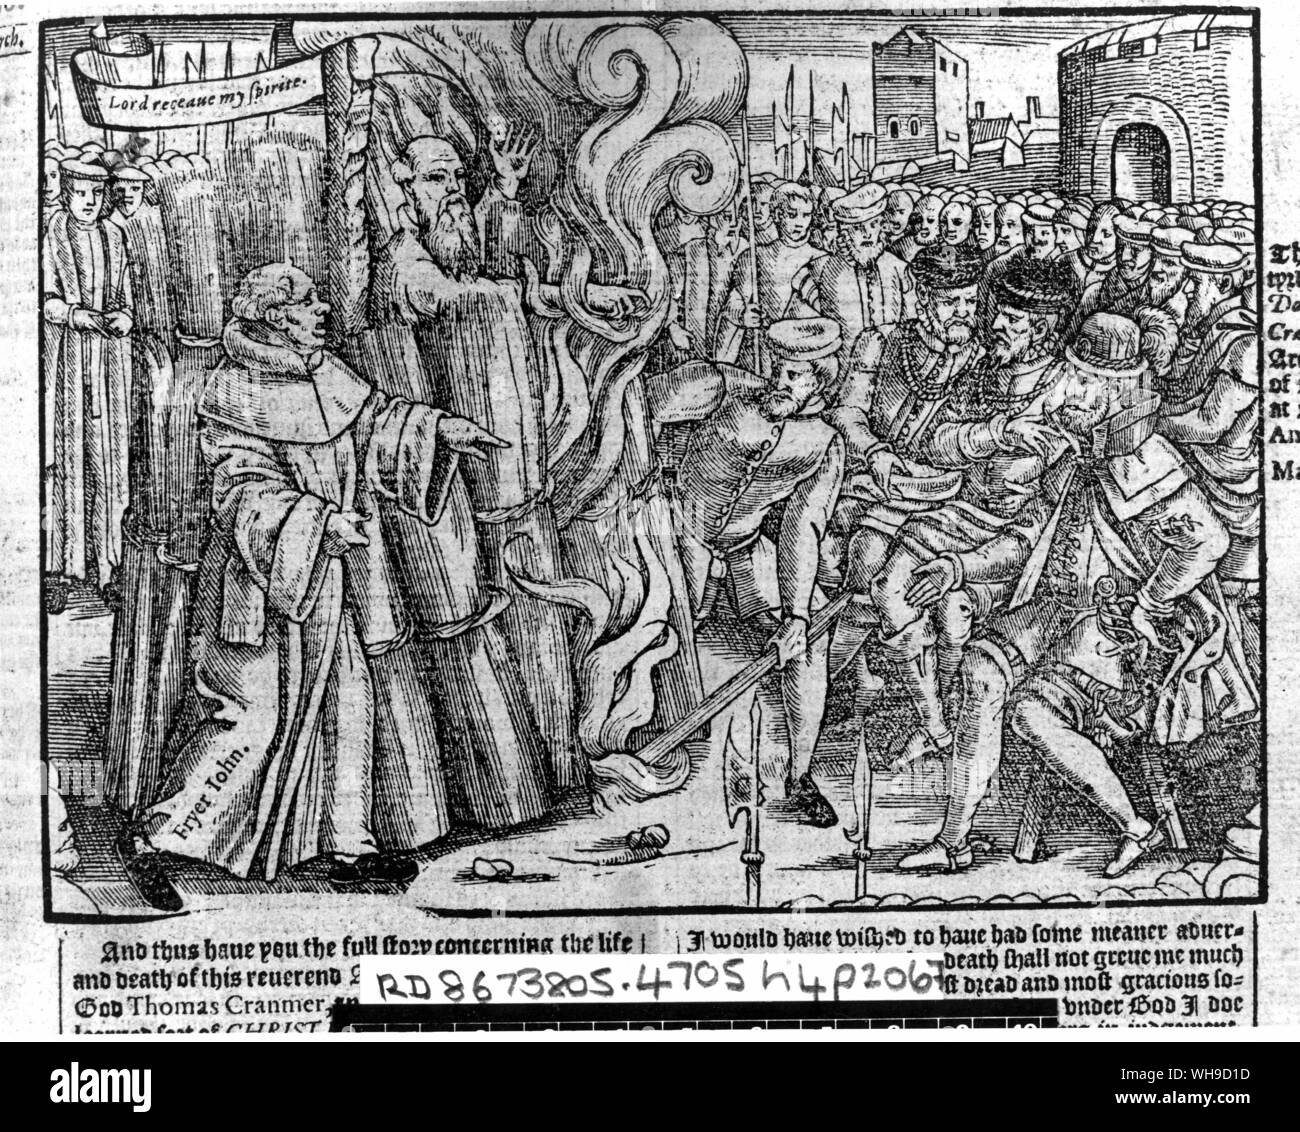 The burning of Thomas Cranmer (1489-1556). English cleric and Archbishop of Canterbury from 1533. He was condemned for heracy under the catholic Mary Tudor. Stock Photo